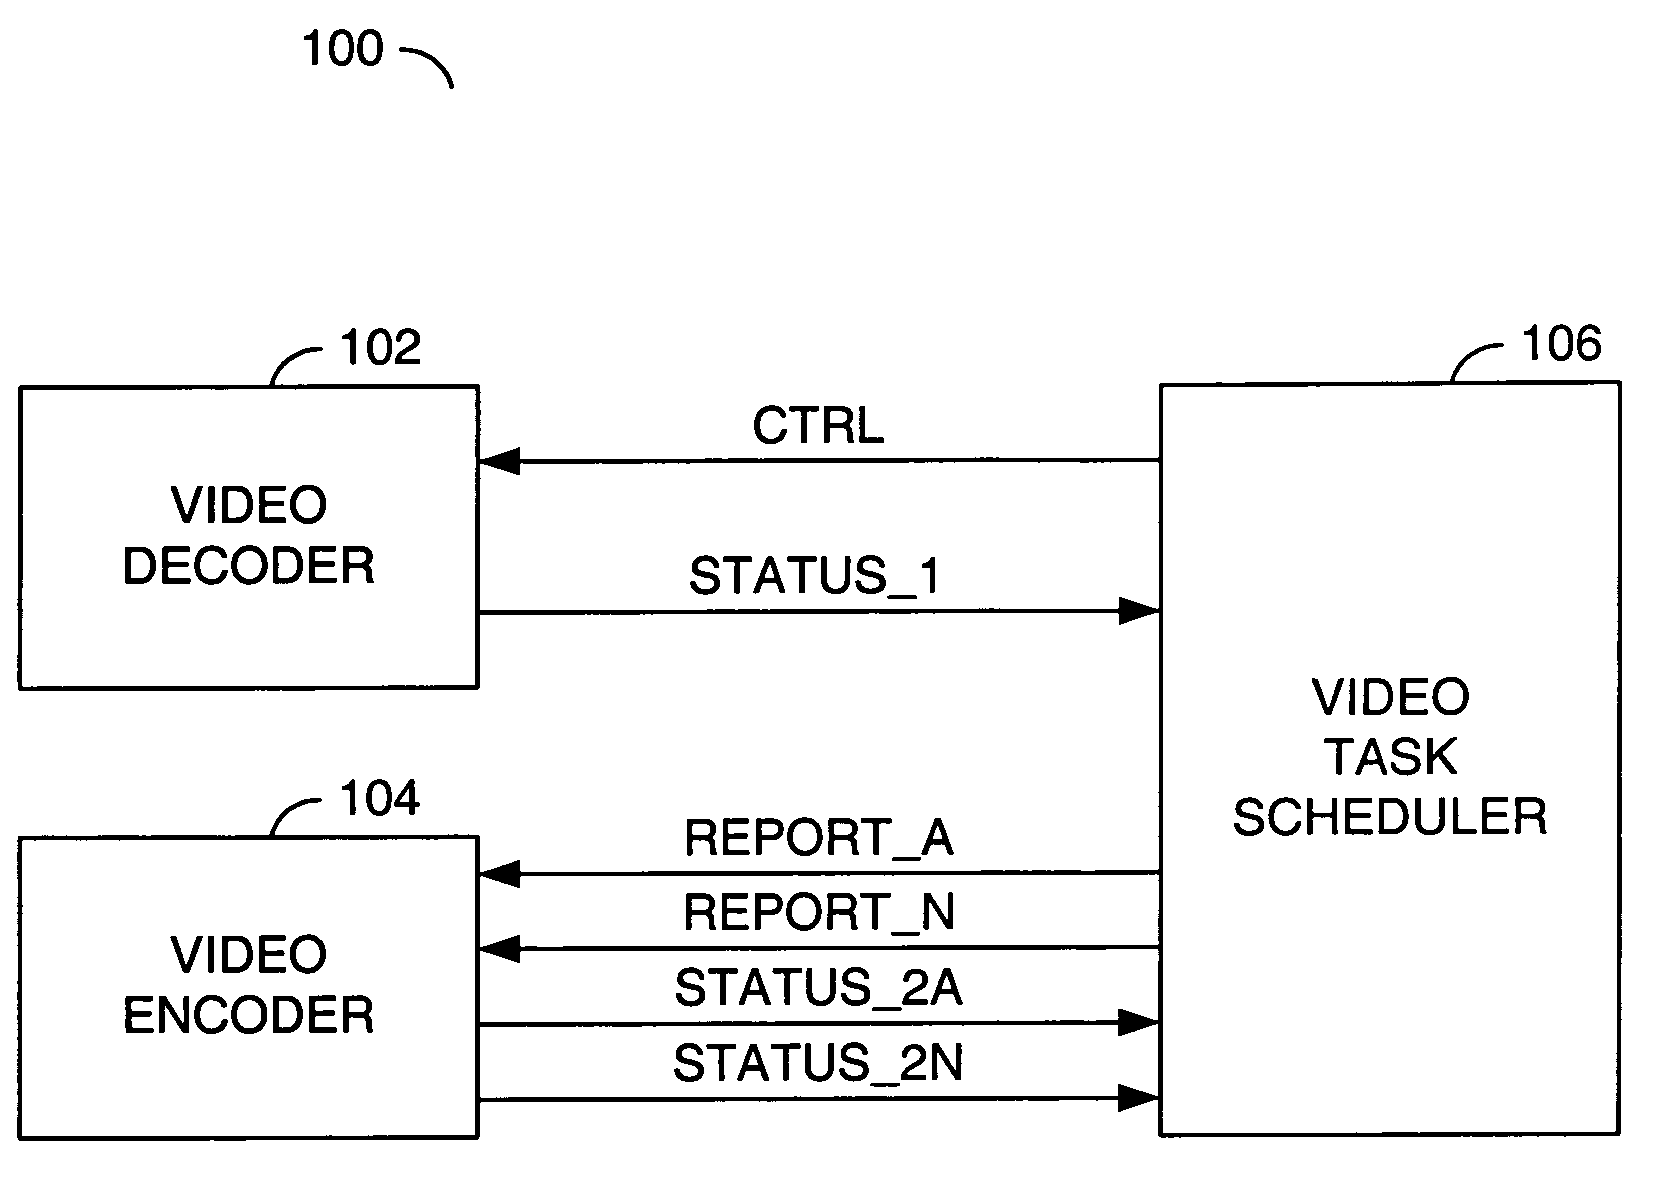 Performance adaptive video encoding with concurrent decoding